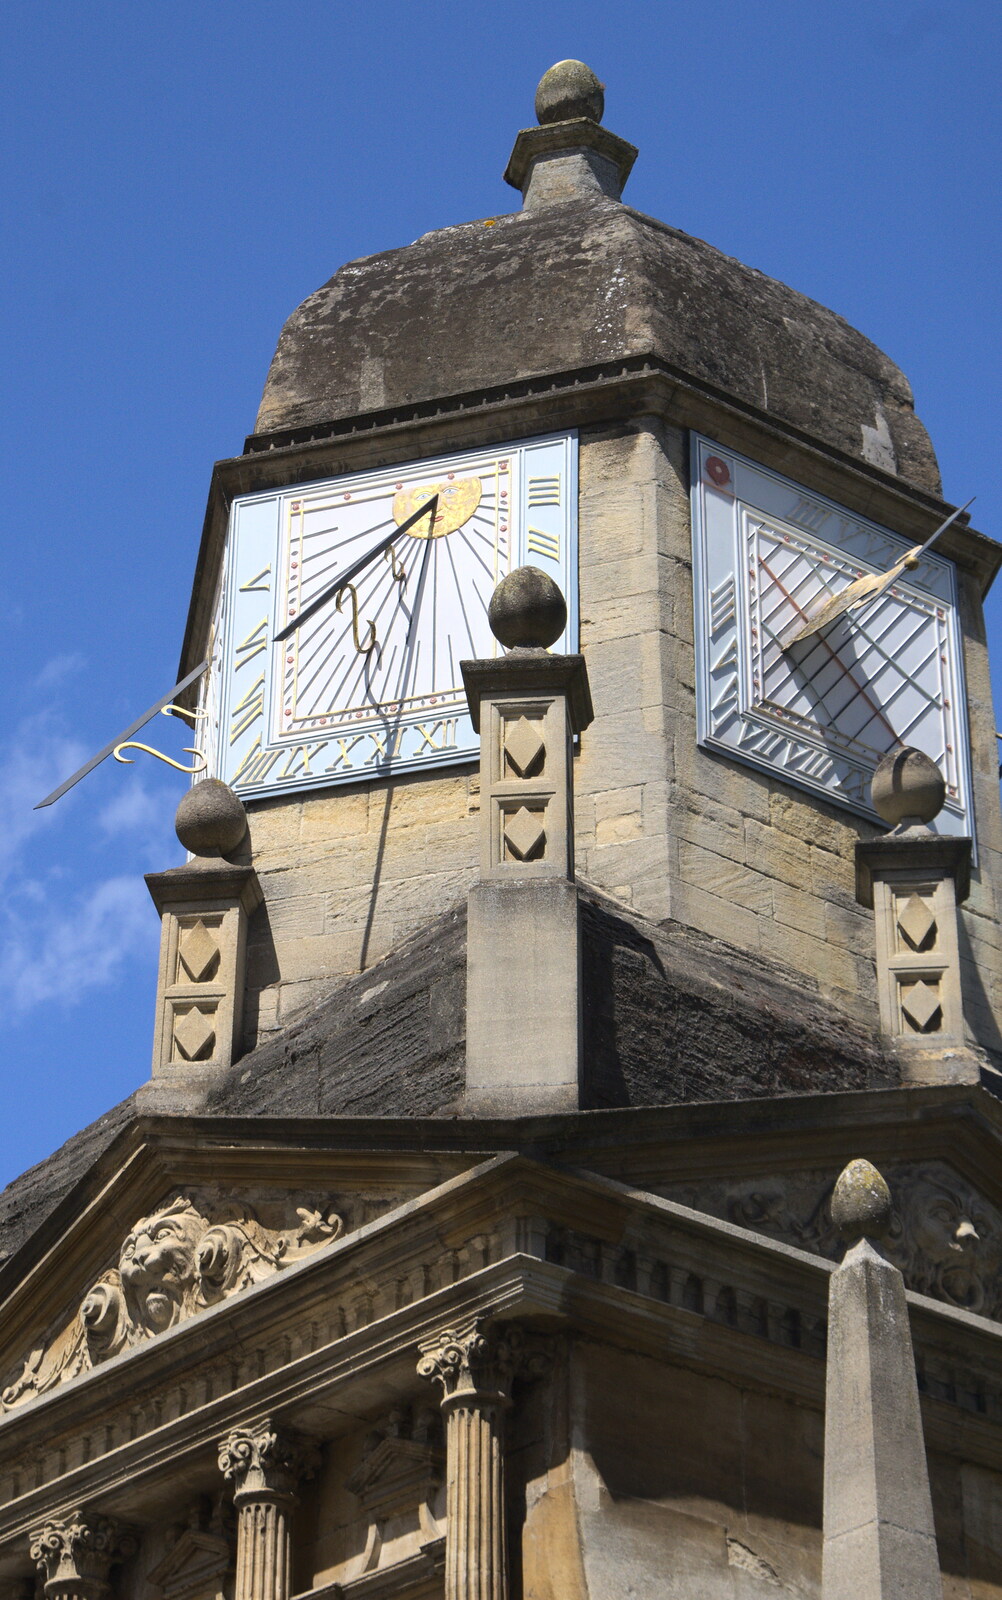 The sundial tower of Gonville and Caius from Punting With Grandad, Cambridge, Cambridgeshire - 6th June 2015